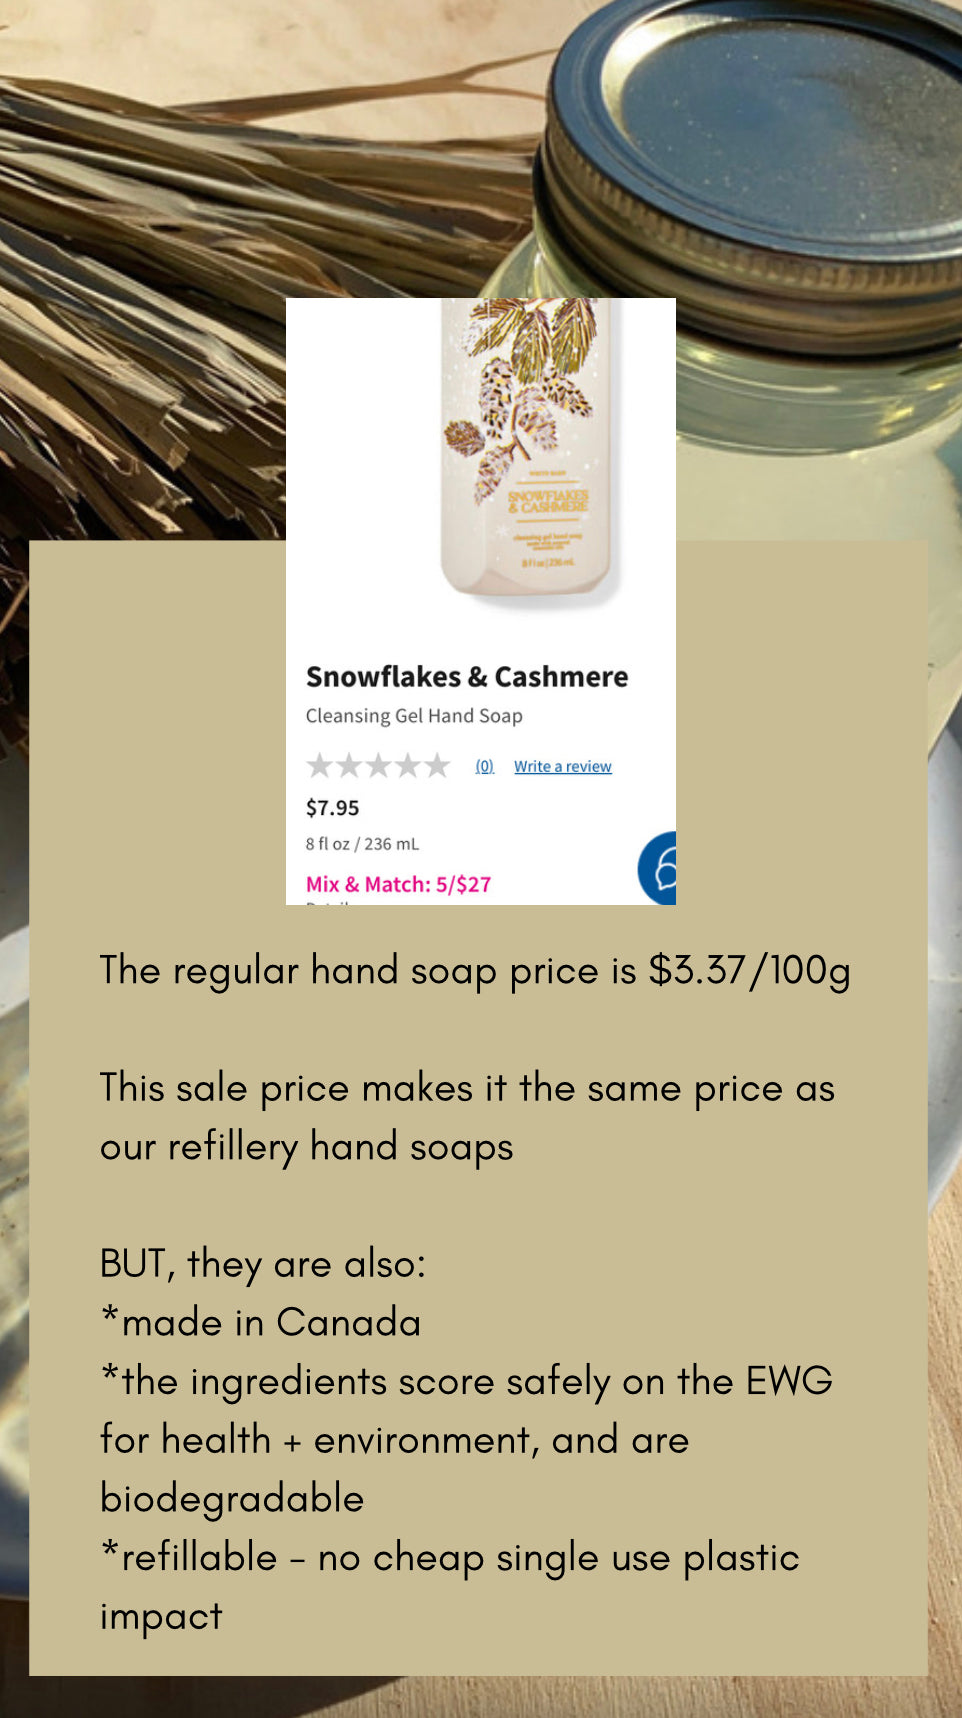 Hand Soap | The Unscented Co.